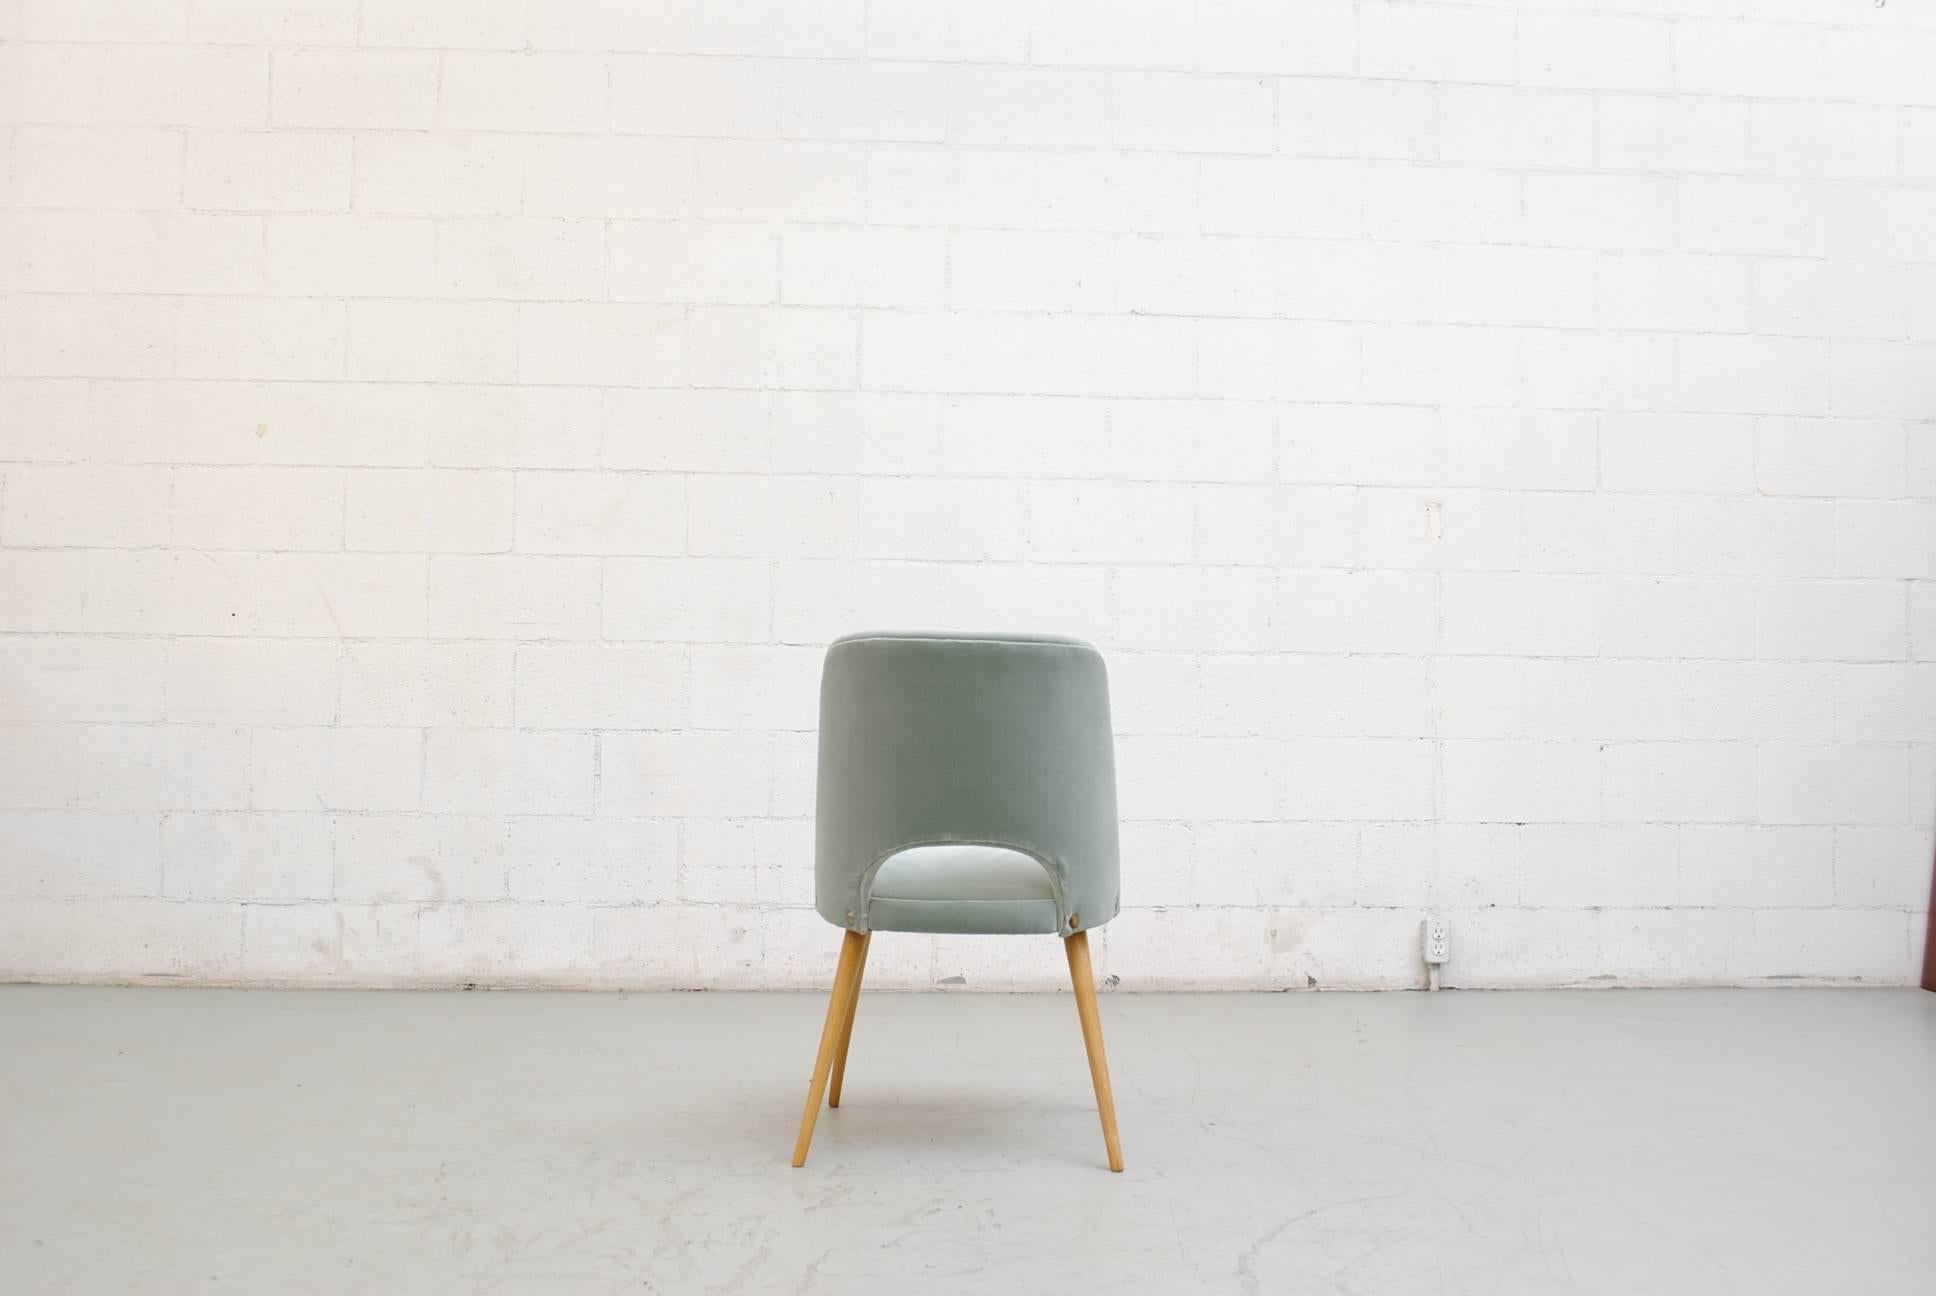 Dutch Mid-Century Saarinen Style Dining or Cocktail Chair in Teal Velvet For Sale